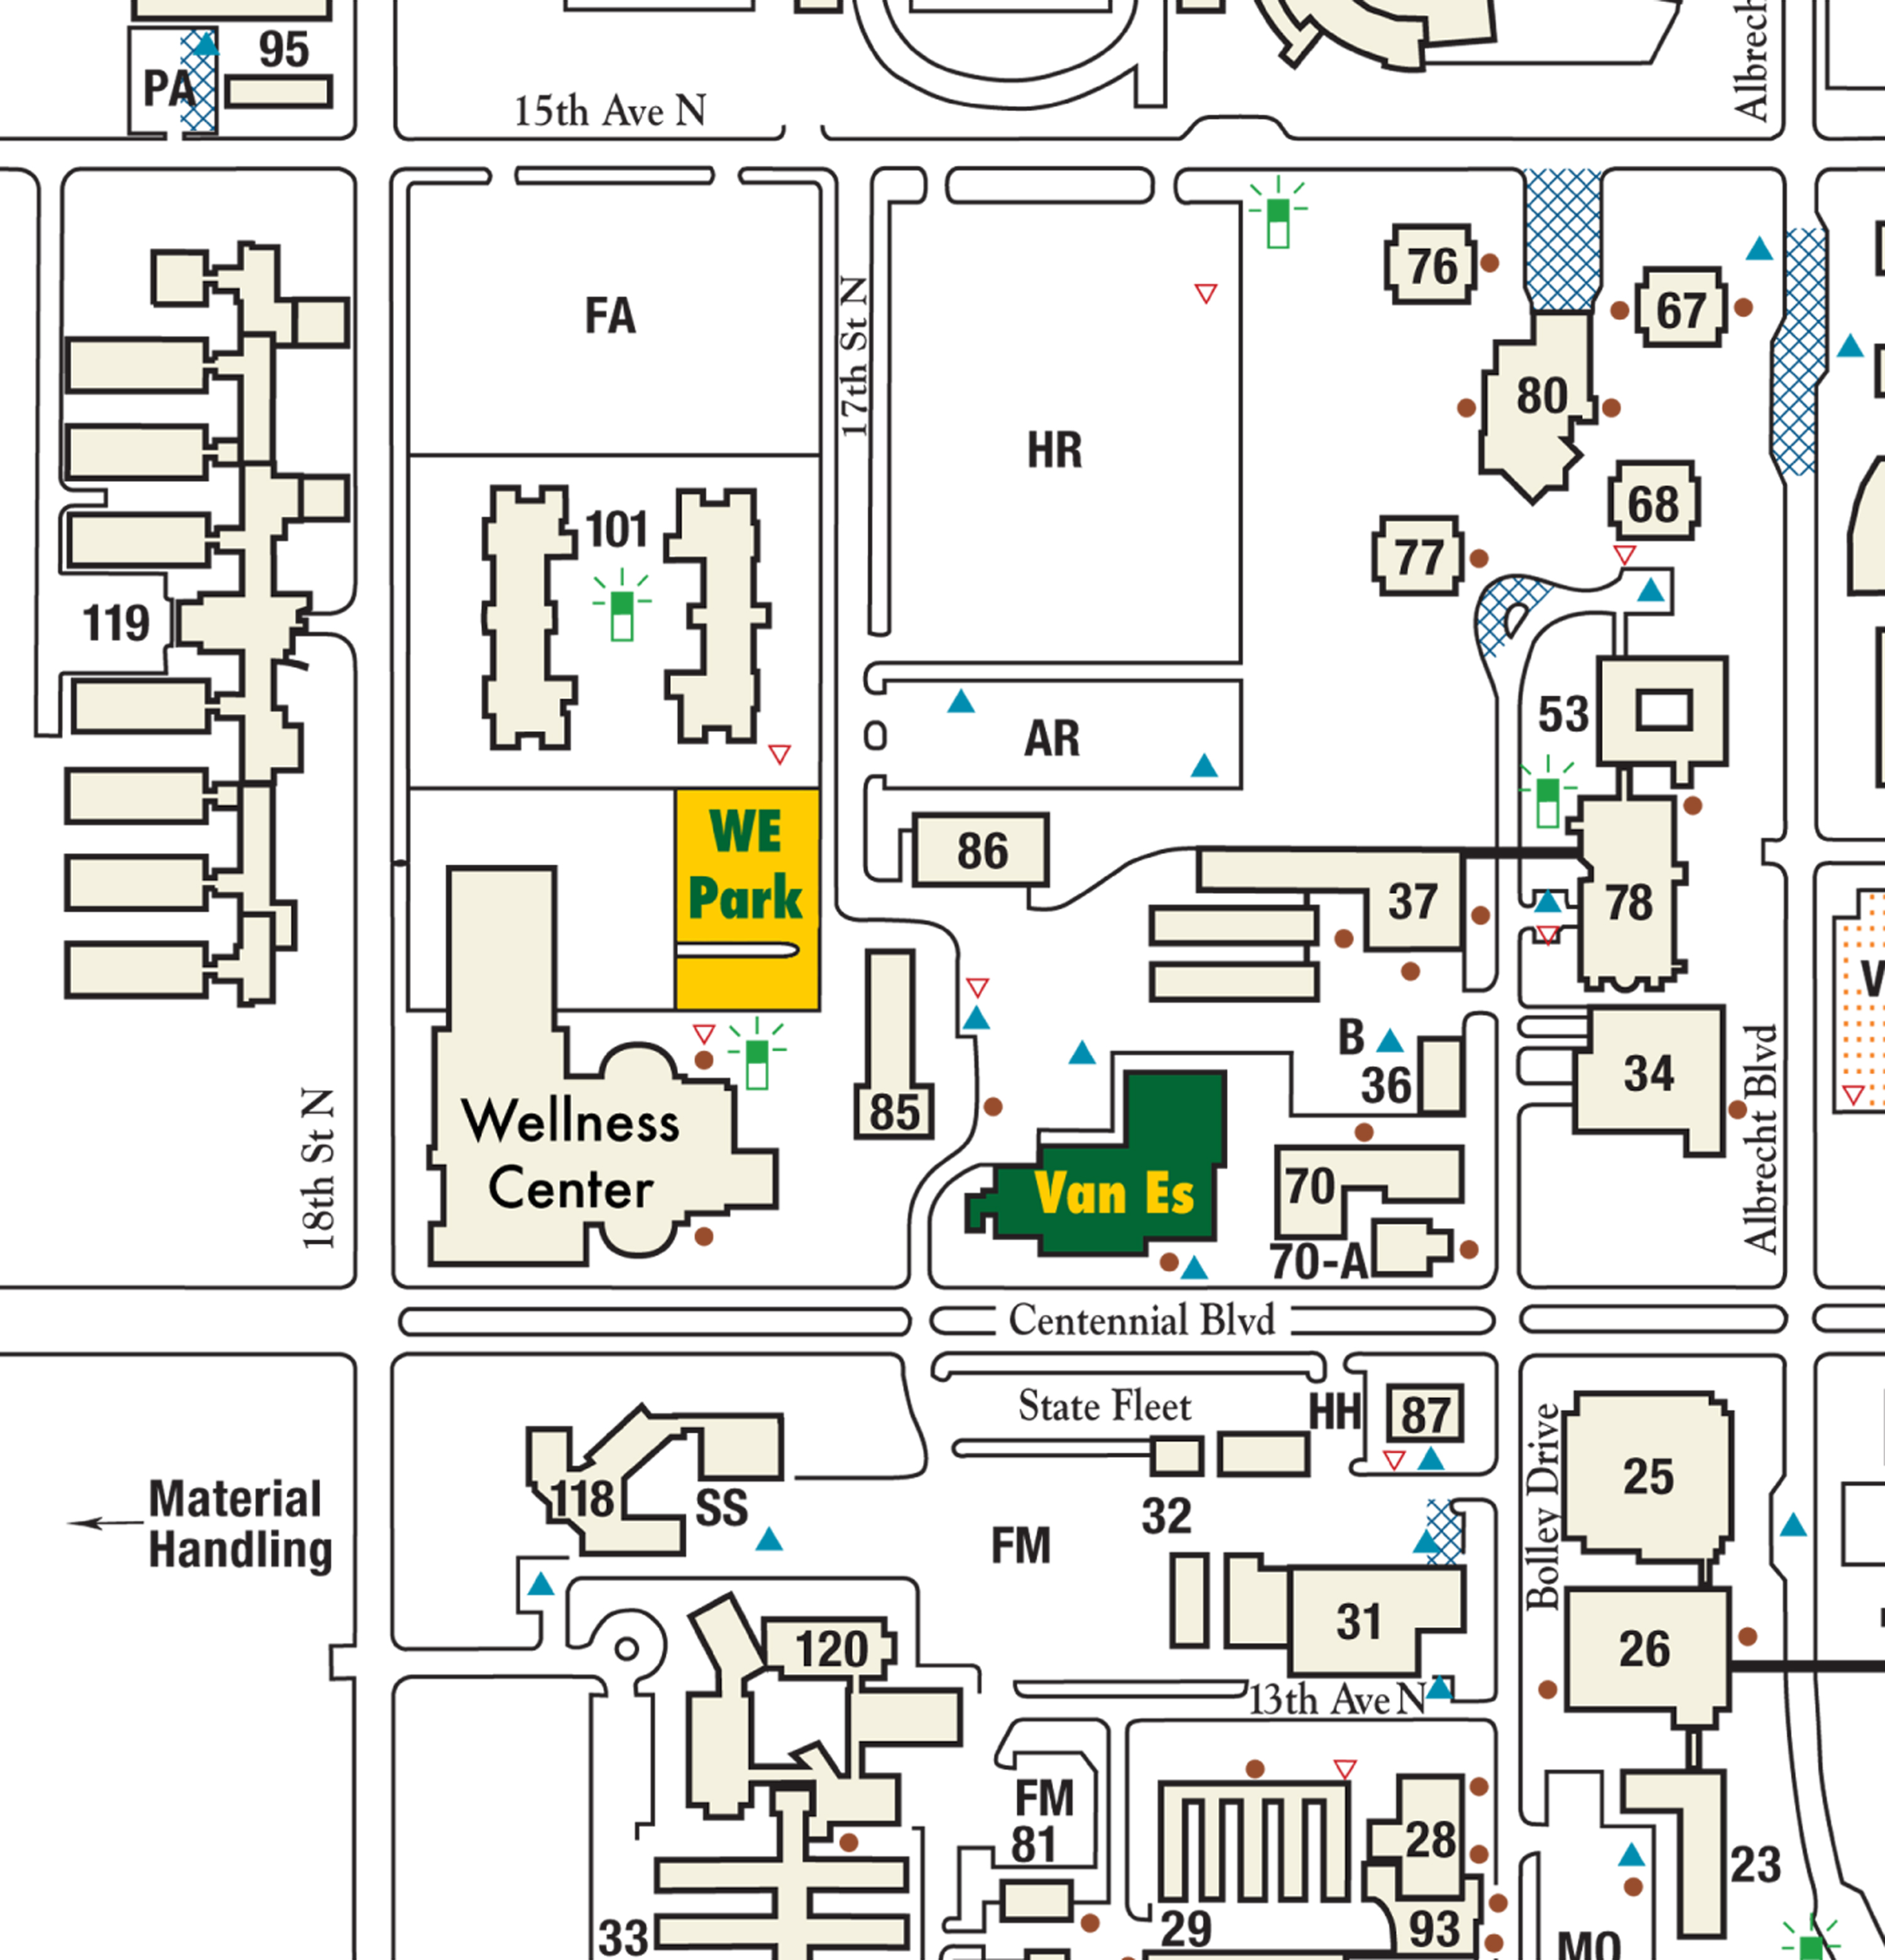 This is a map image of the location of Van Es on campus.  Van Es Hall, 1523 Centennial Blvd., Fargo, ND 58102